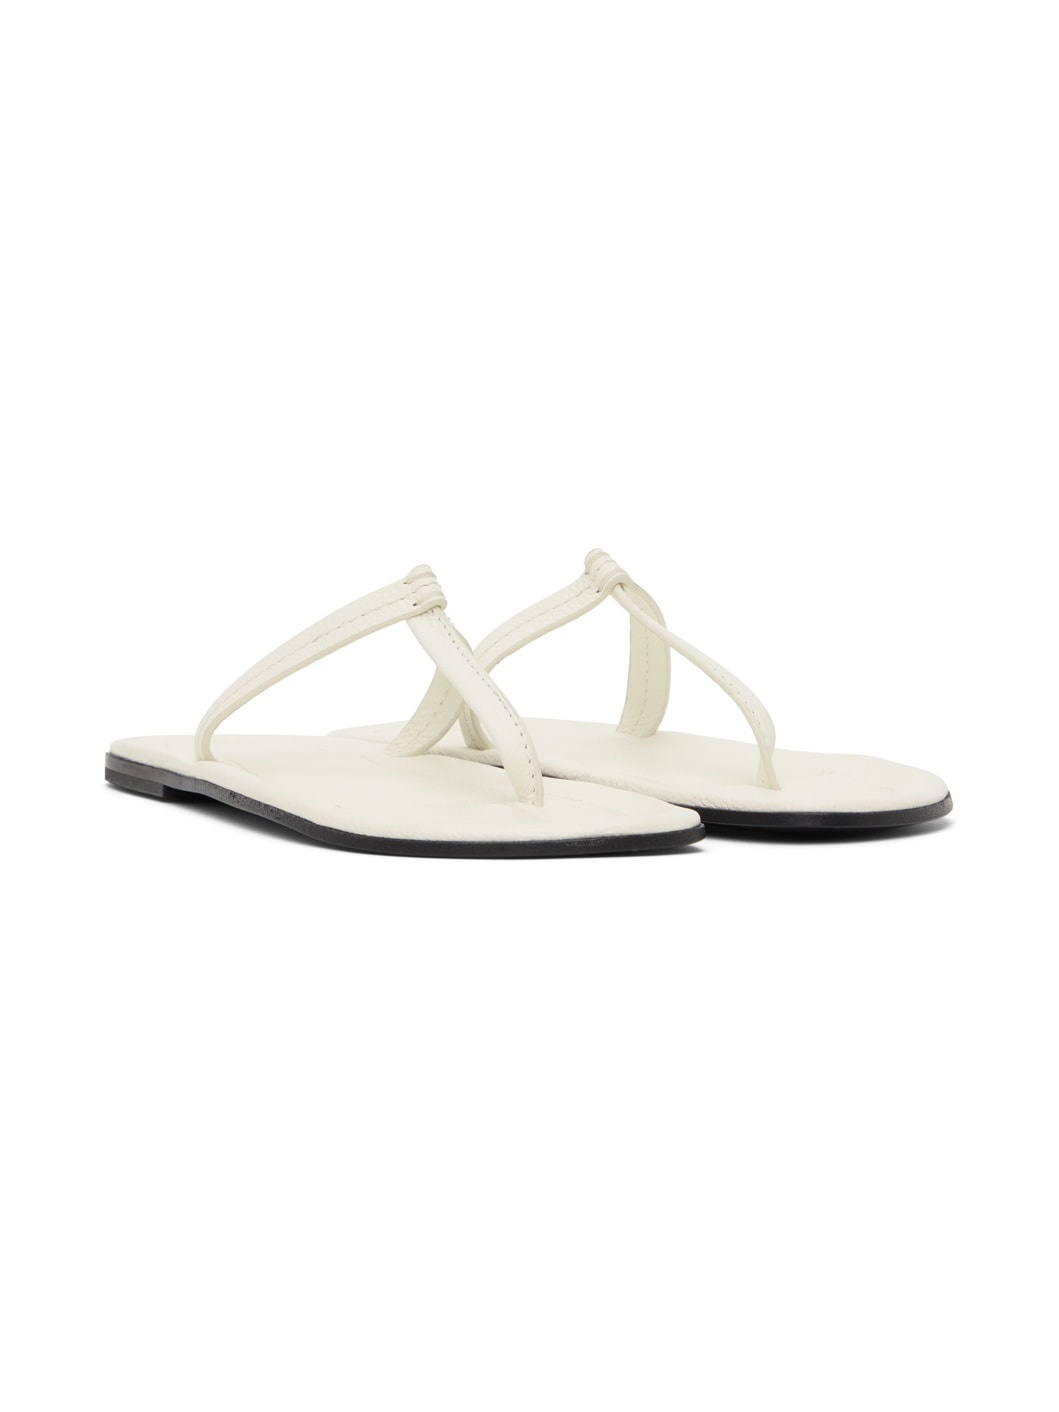 Off-White 'The T-Strap' Sandals - 4